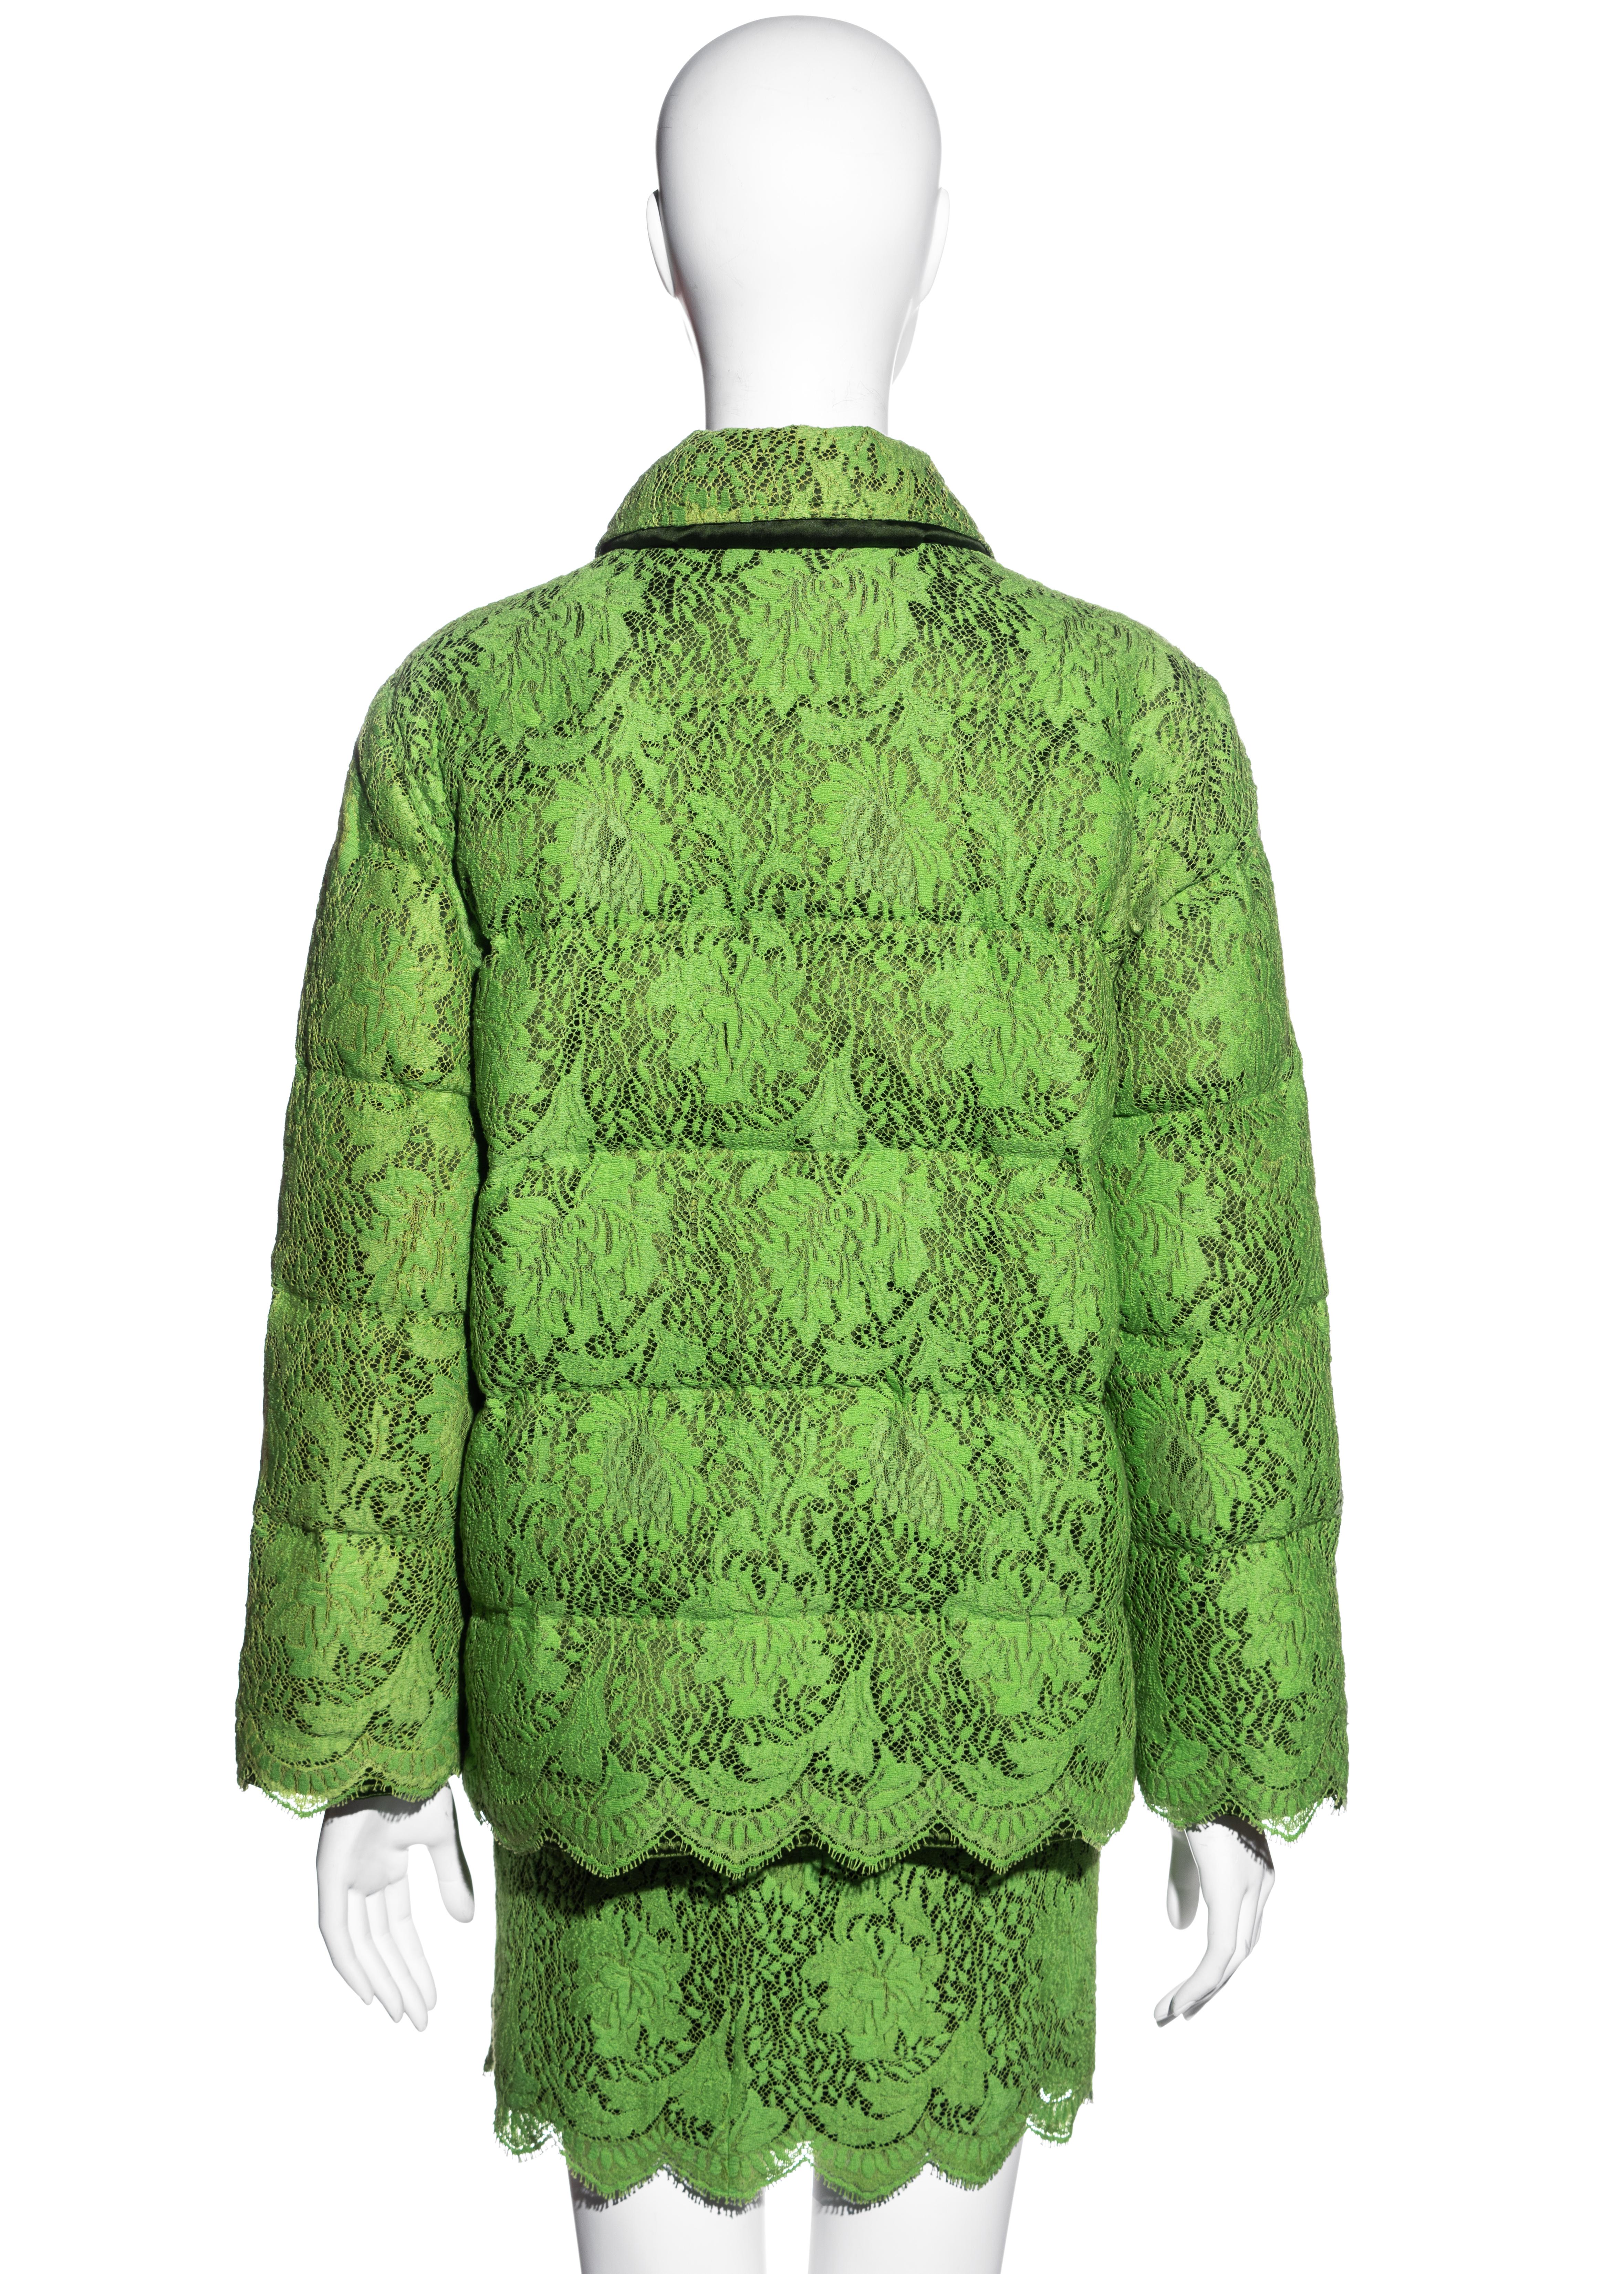 Gianni Versace lime green lace goose down puffer jacket and skirt set, fw 1996 In New Condition For Sale In London, GB